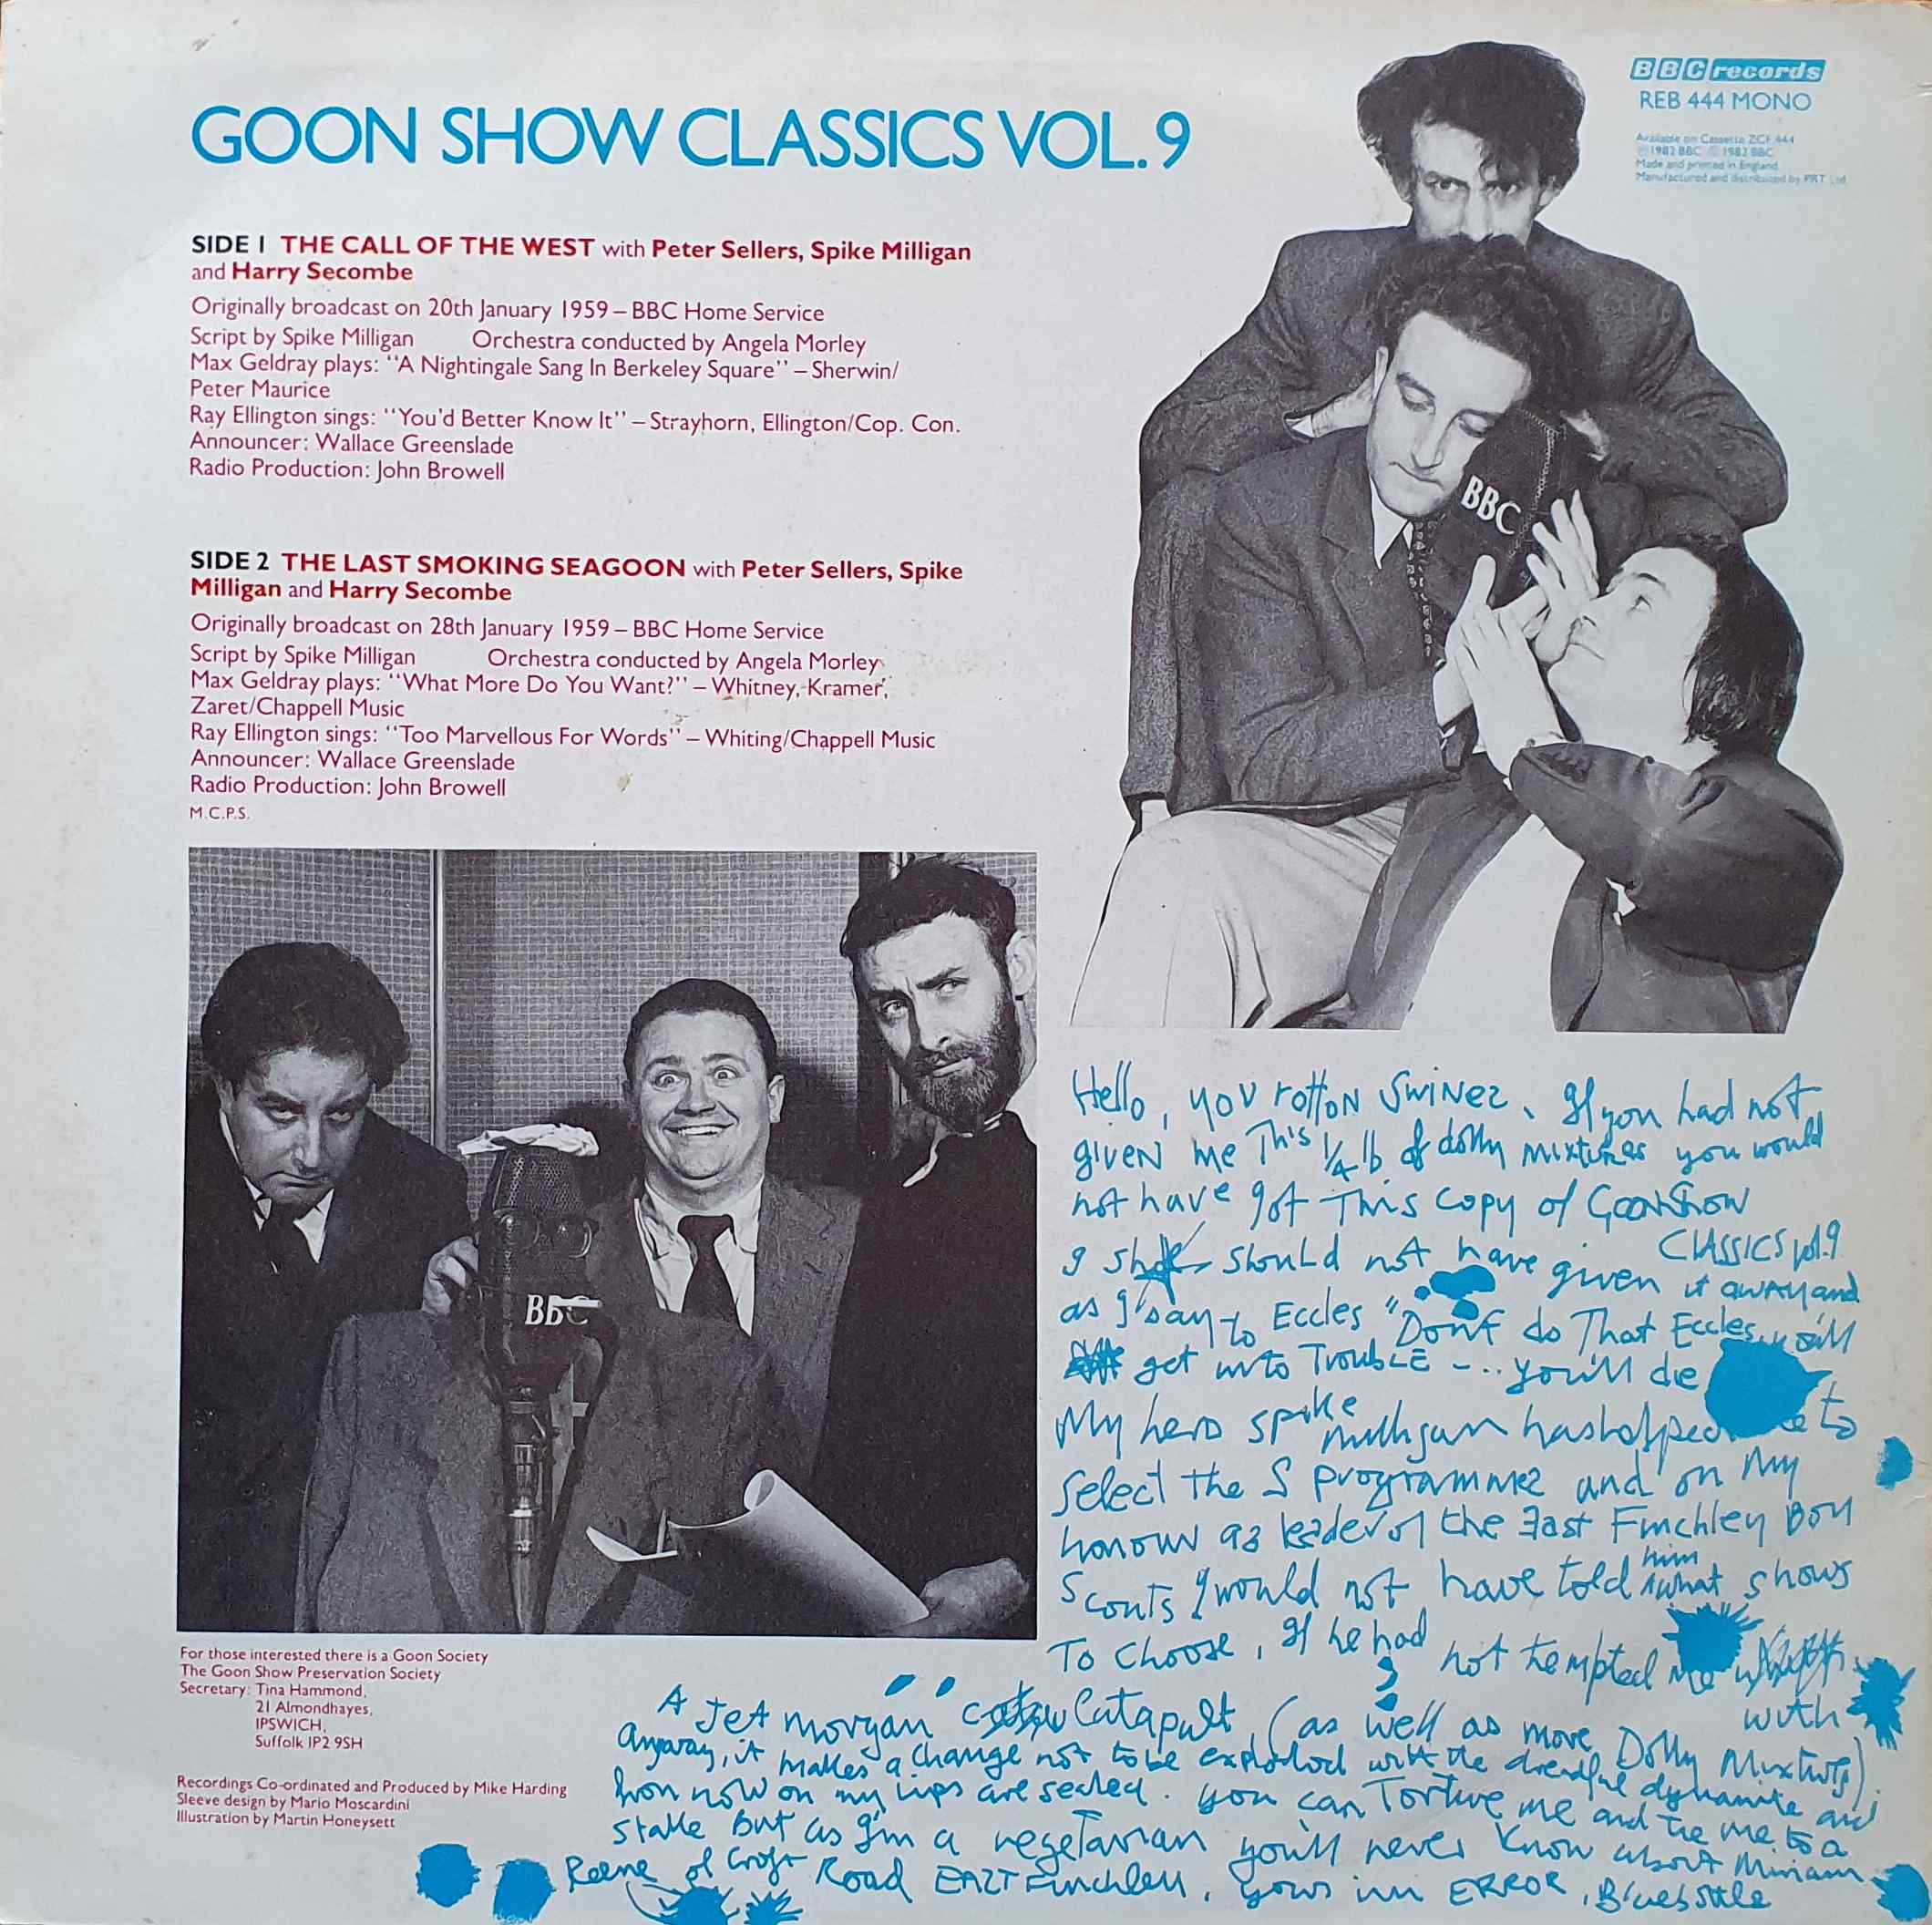 Picture of REB 444 Goon show classics - Volume 9 by artist Spike Milligan from the BBC records and Tapes library